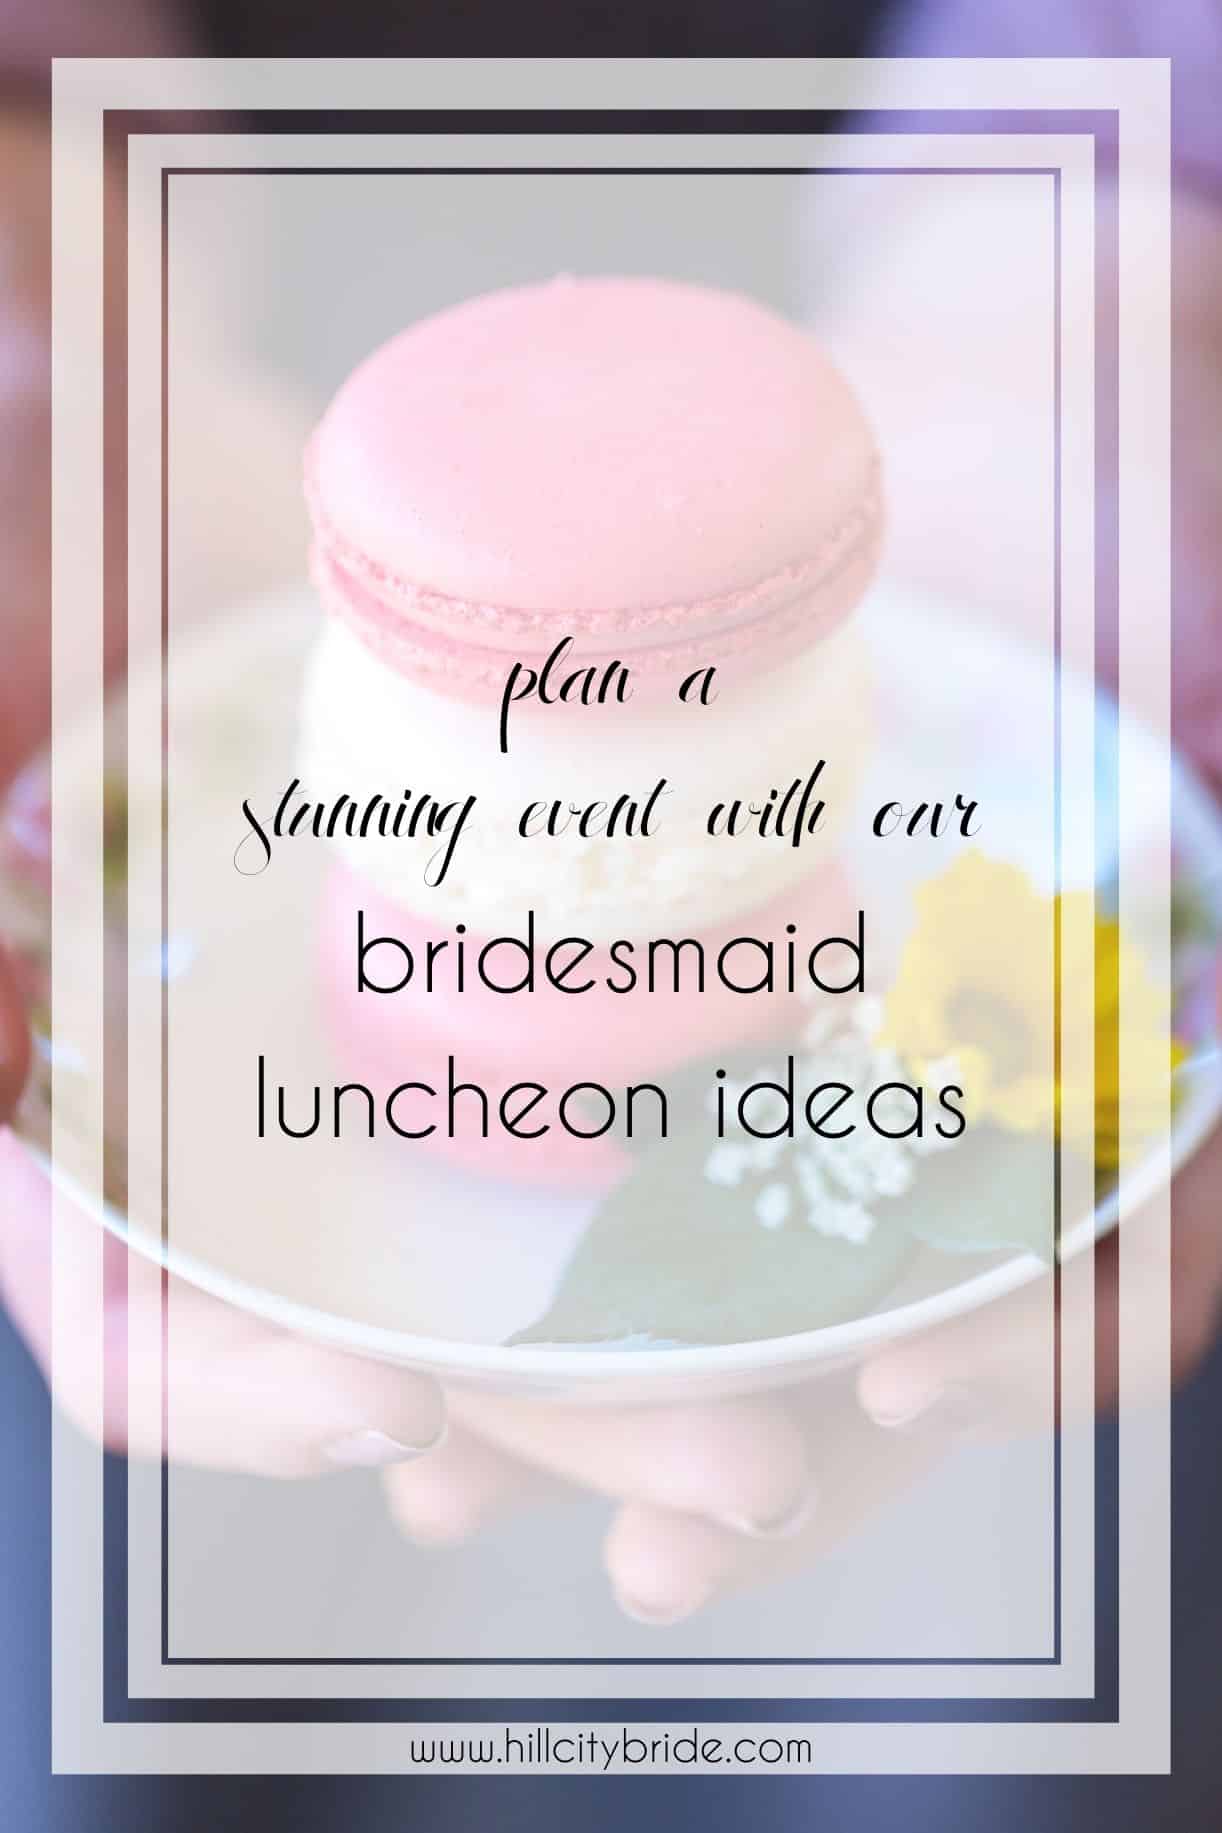 How to Plan a Stunning Event Using Easy Bridesmaid Luncheon Ideas